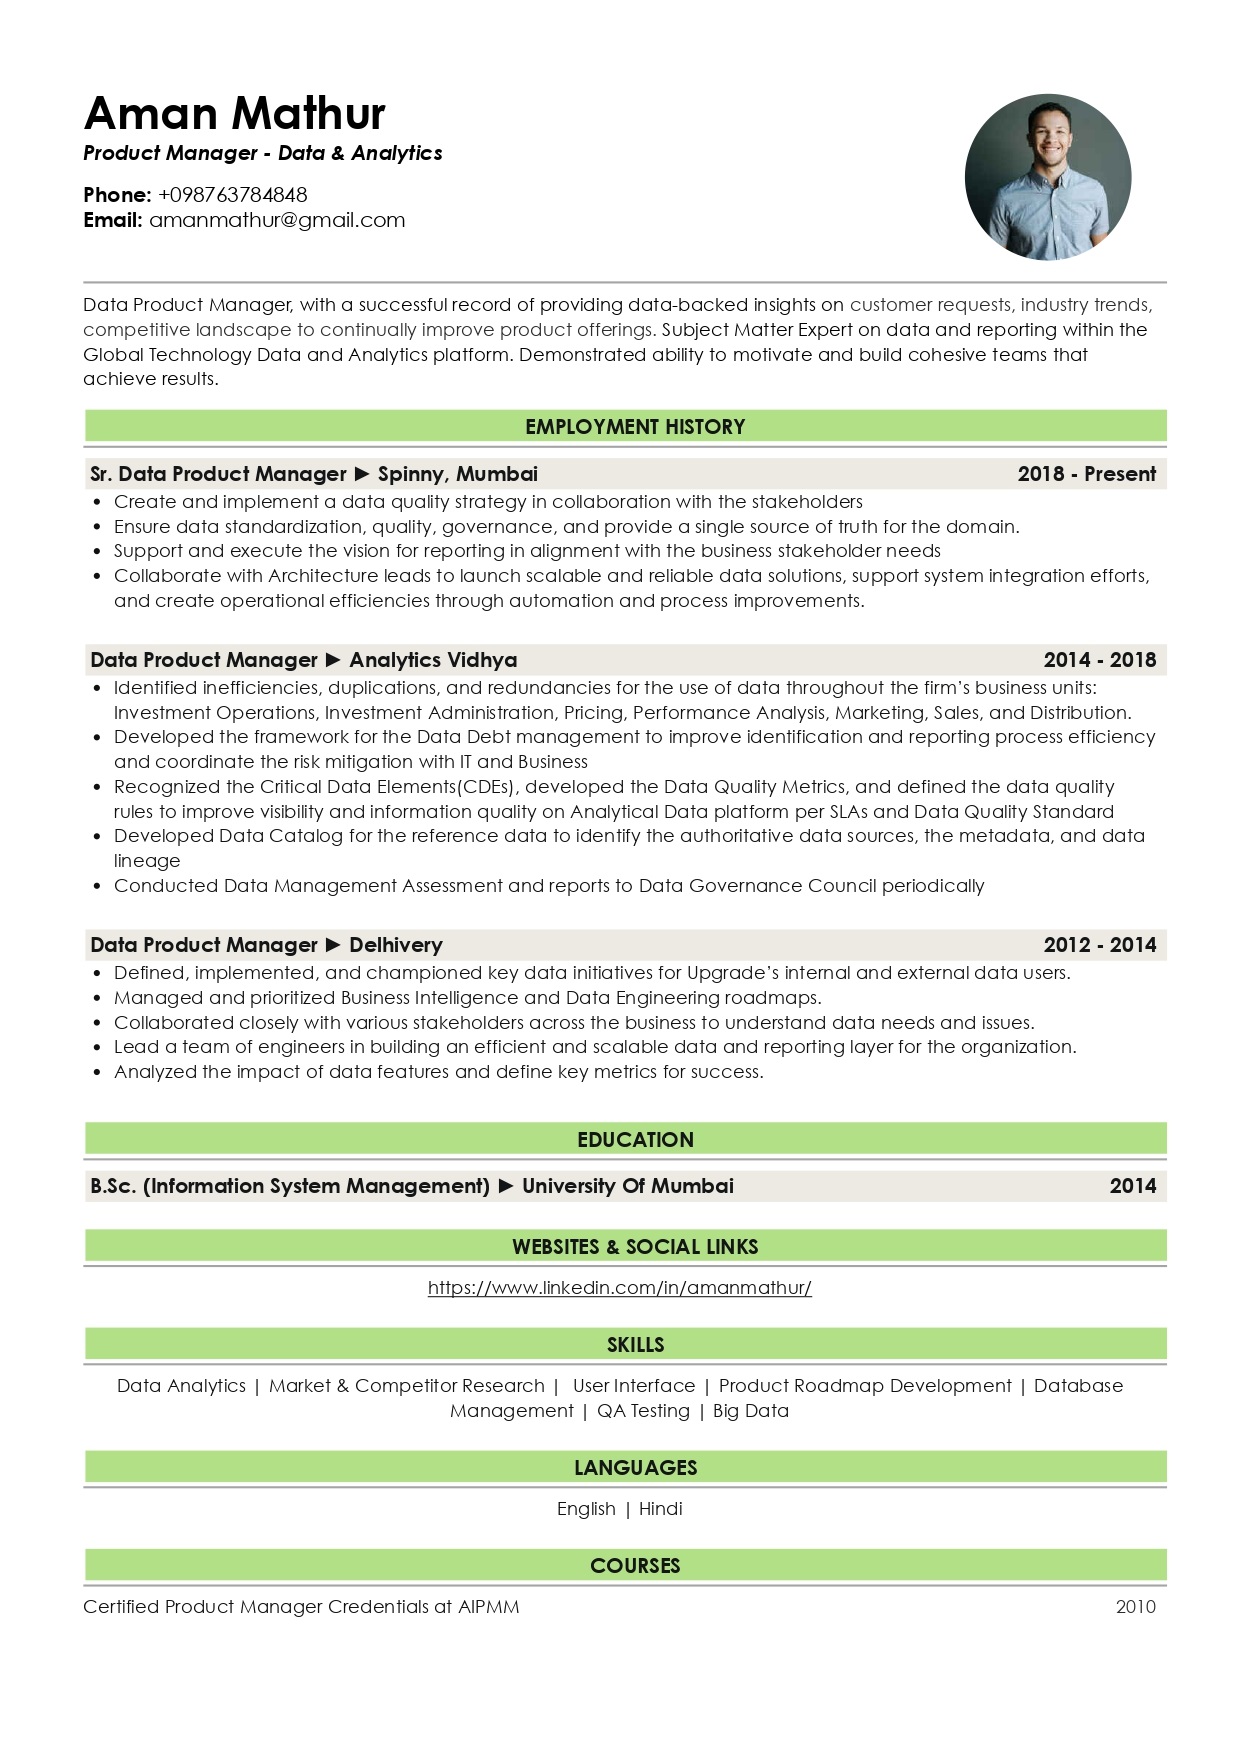 Sample Resume of Data Product Manager | Free Resume Templates & Samples on Resumod.co